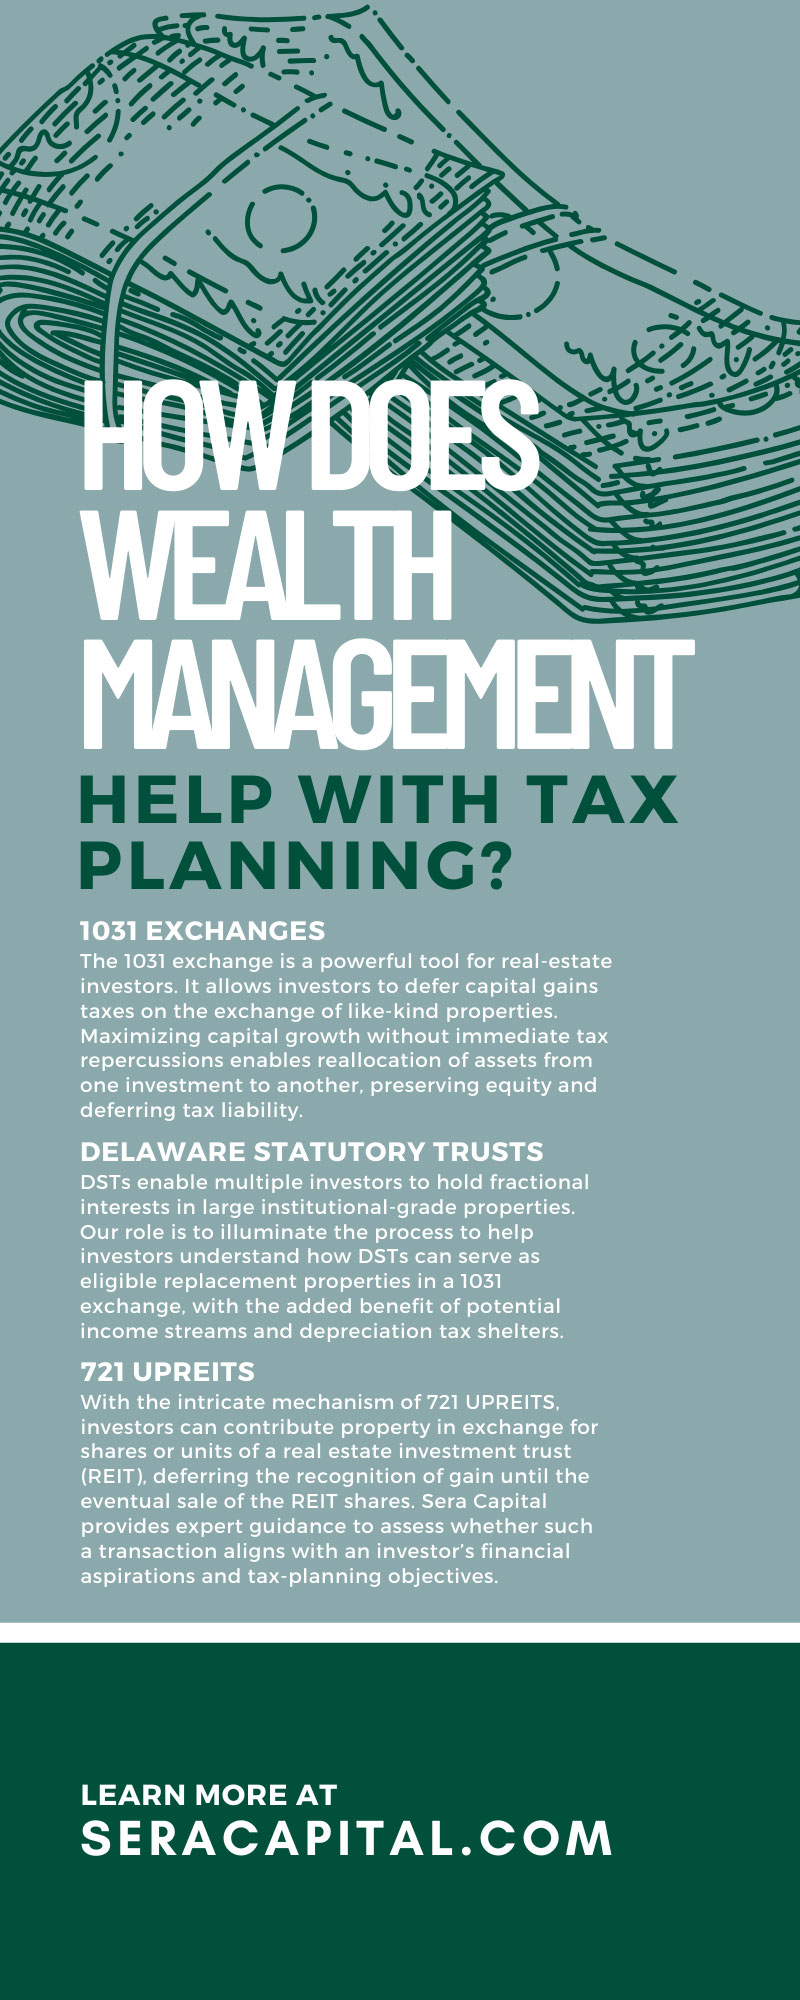 How Does Wealth Management Help With Tax Planning?